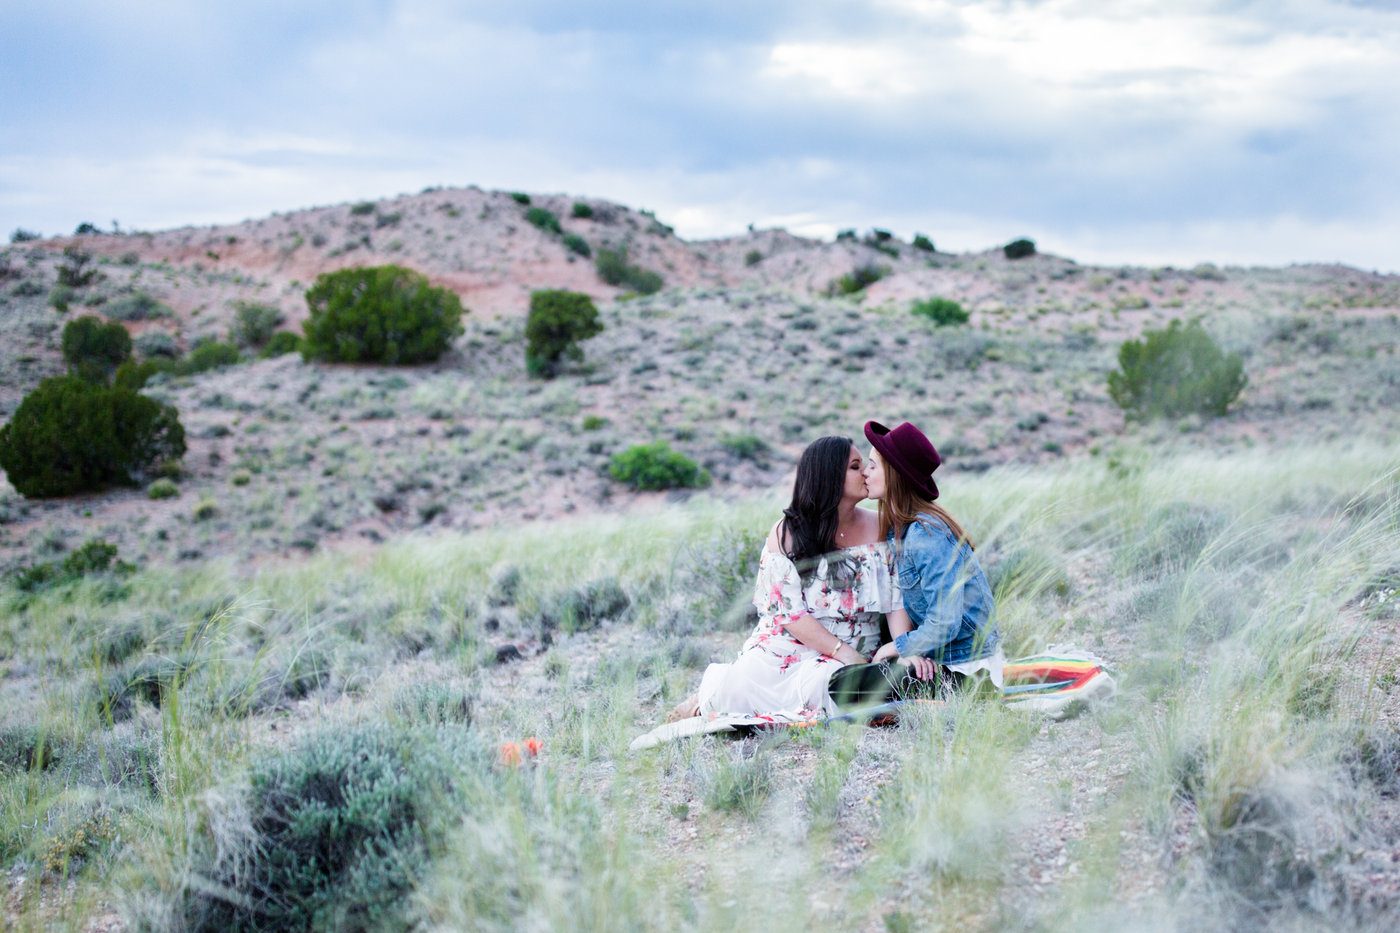 View More: http://chrisikphotography.pass.us/pili--siennas-engagement-photos